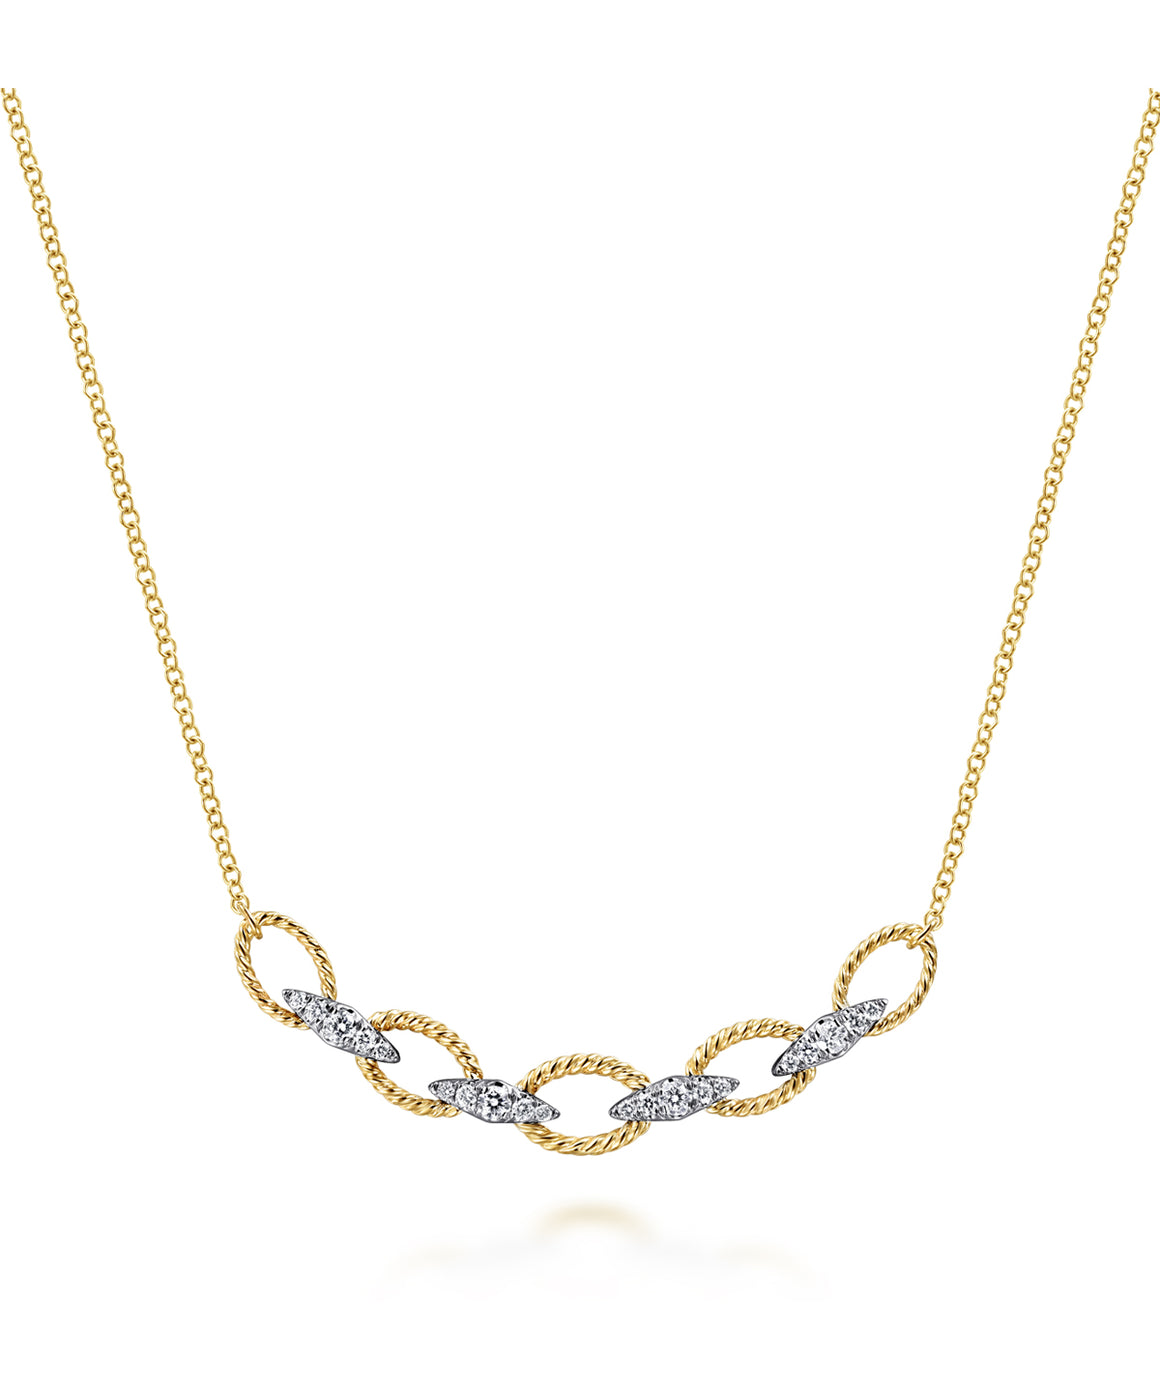 14K Yellow-White Gold Twisted Rope Oval Link Necklace with Diamond Connectors